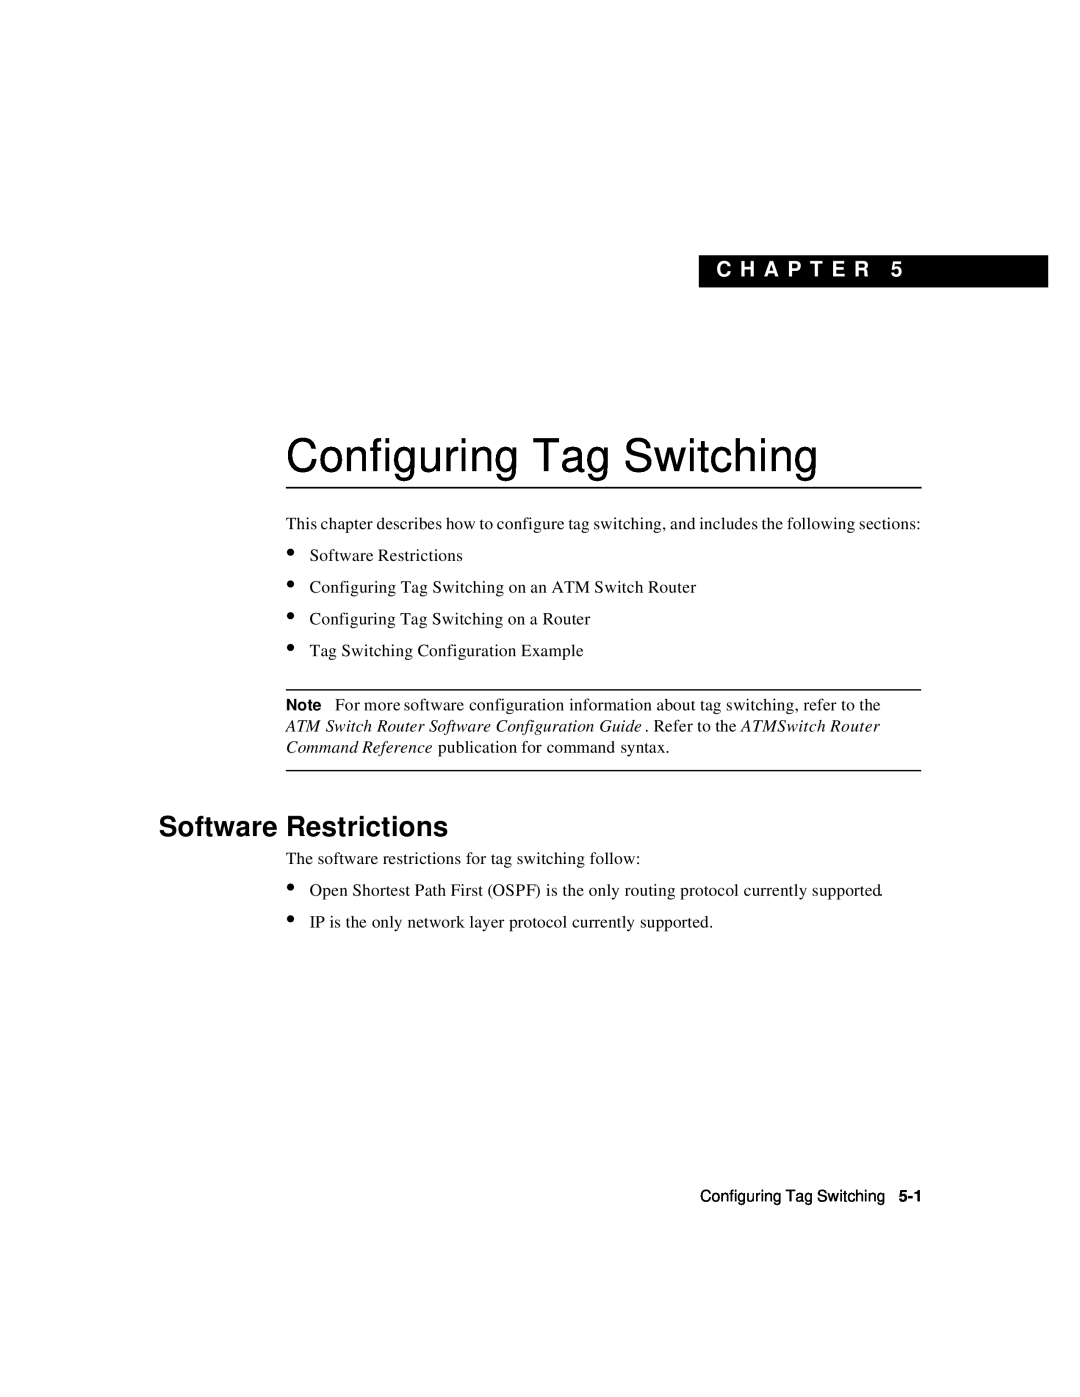 Cisco Systems 78-6897-01 manual Configuring Tag Switching, Software Restrictions, C H A P T E R 